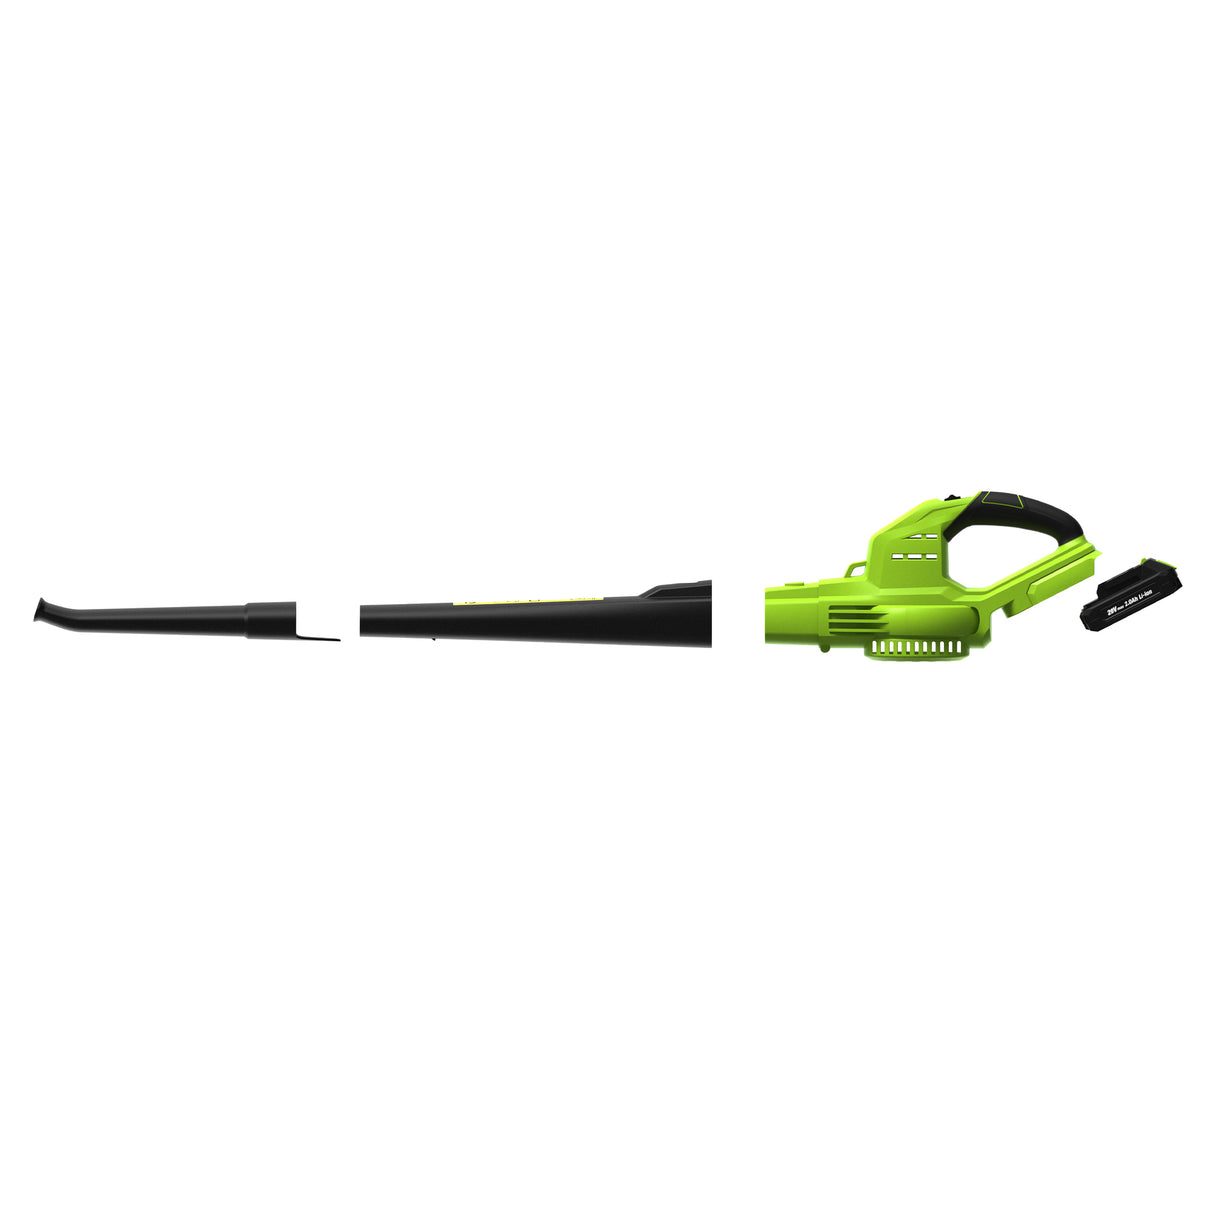 20V 2 Speed Cordless Battery Leaf Blower w/ 2.0Ah Battery & Charger